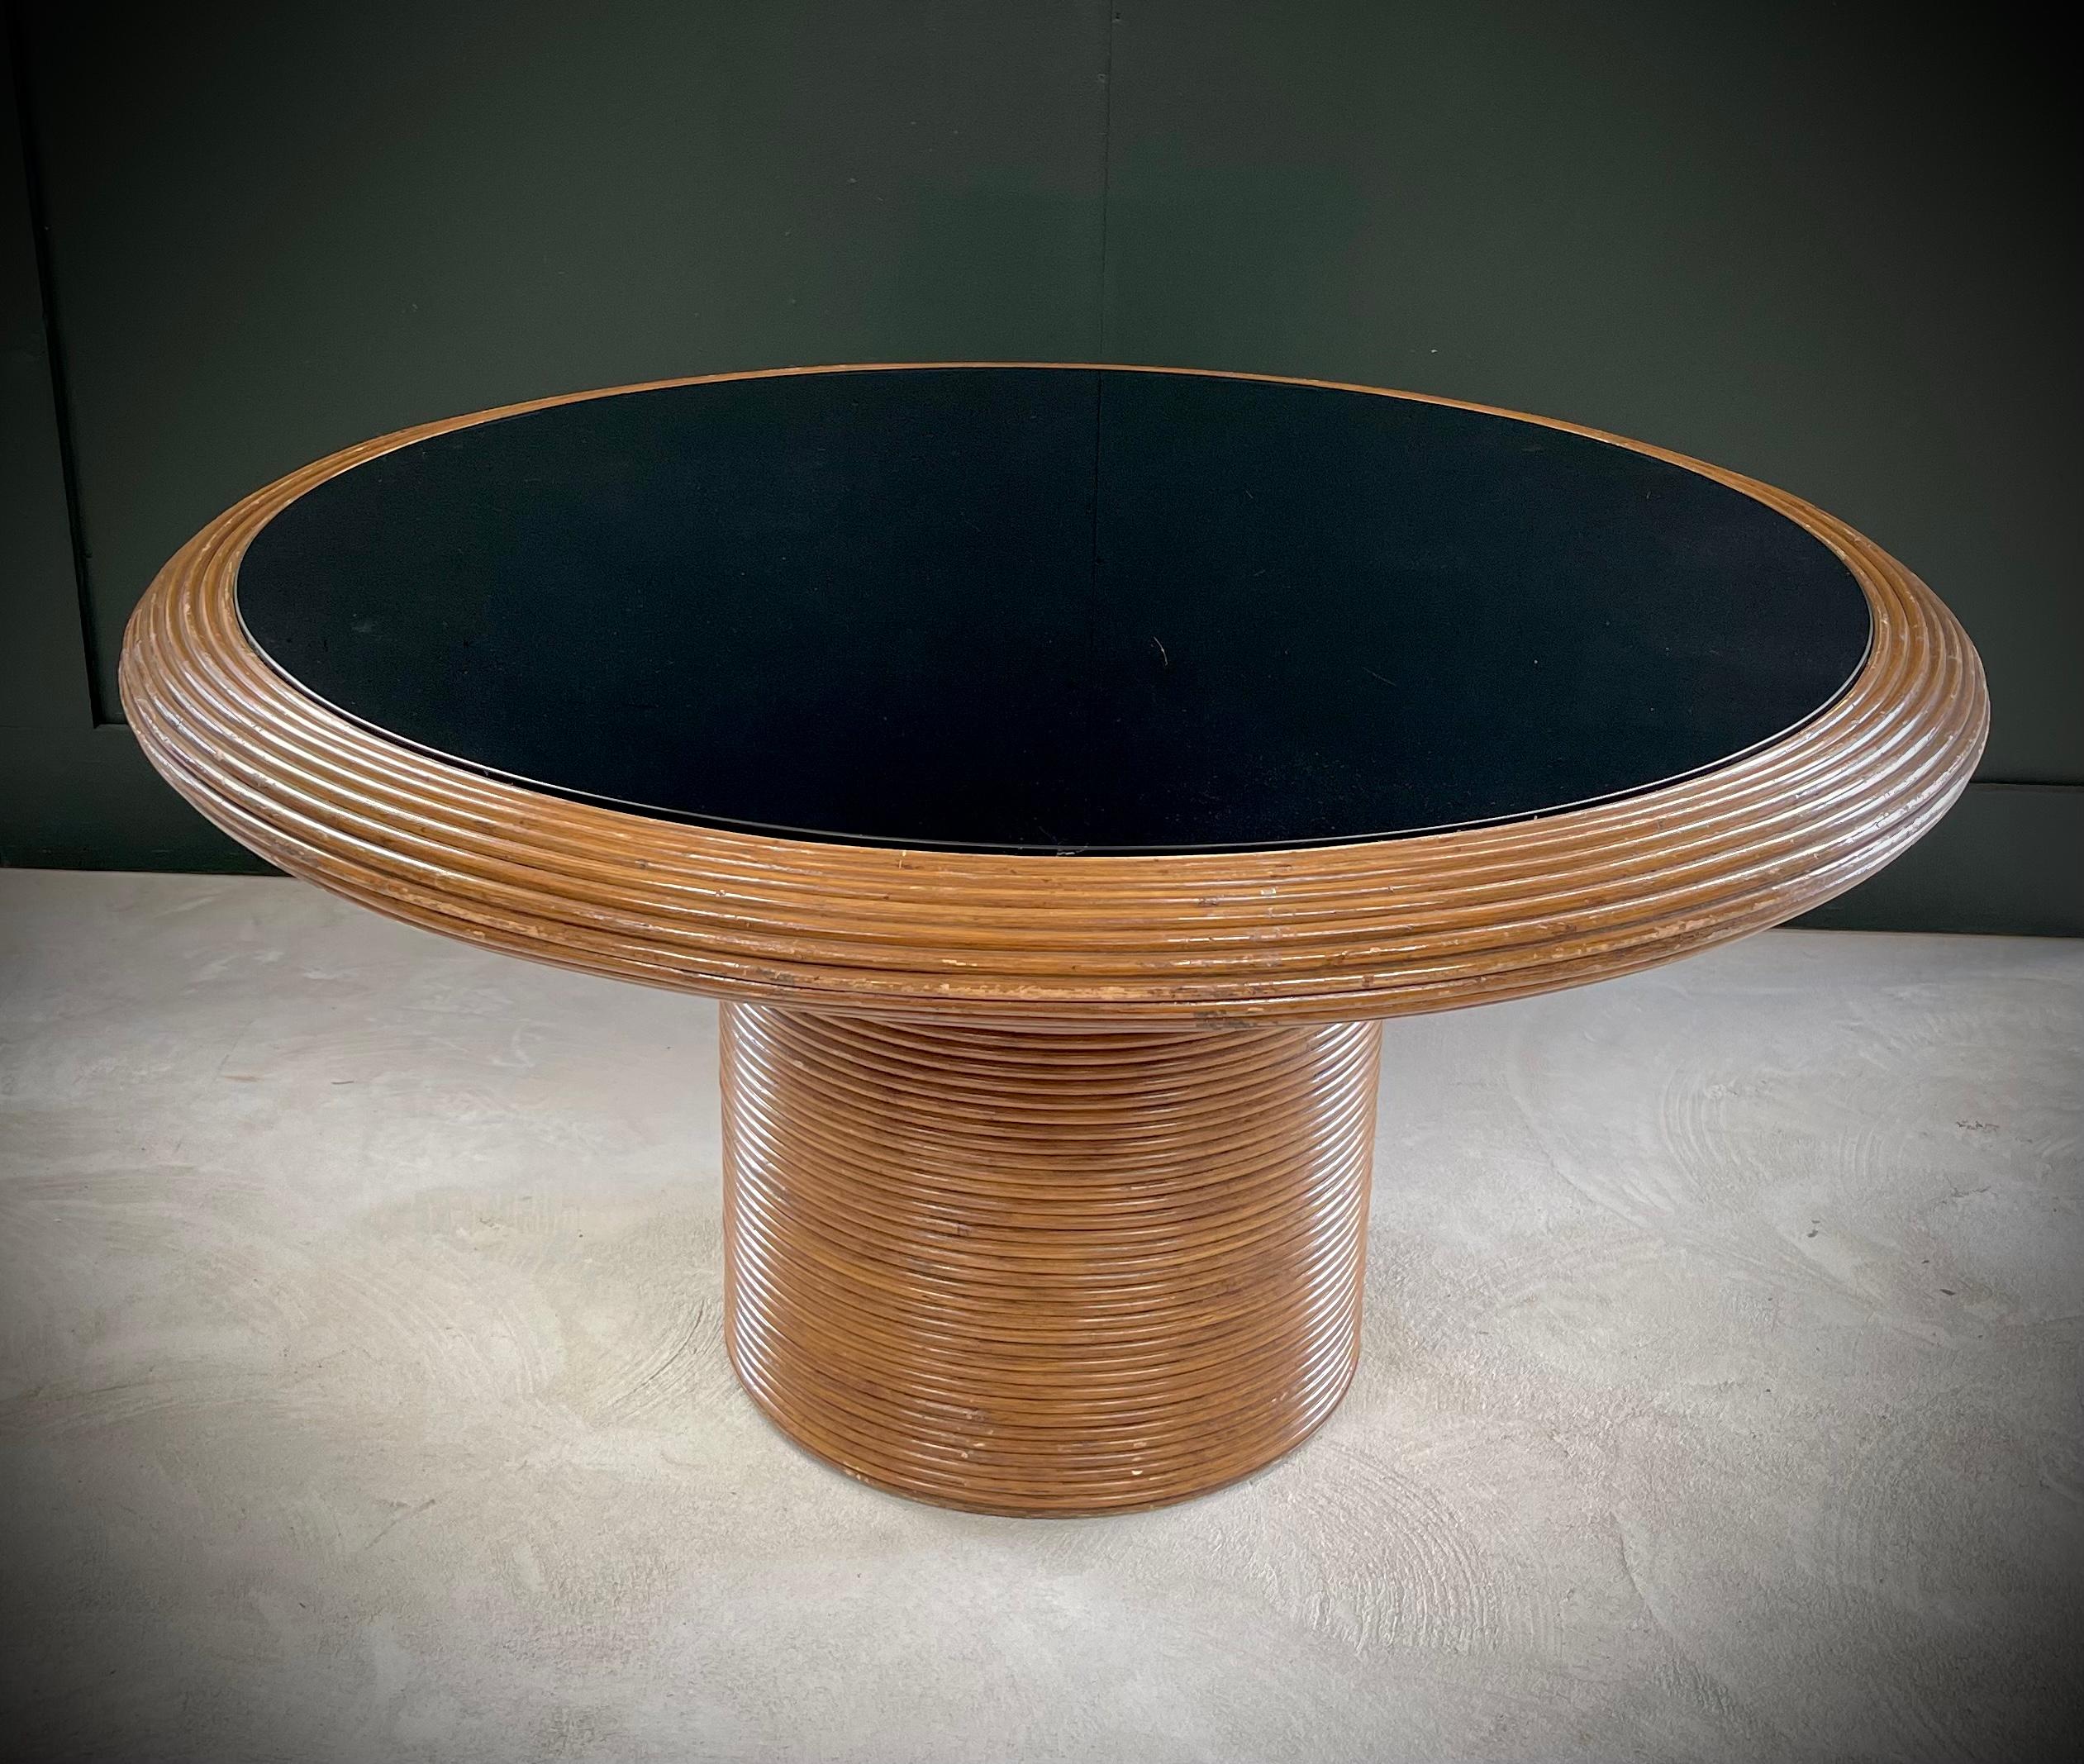 Transform your dining space into a timeless retreat with this exquisite Henry Olko Round Pencil Reed Dining Table. Crafted in the 1970s for Willow and Reed, it exudes elegance with its split reed pedestal base and sleek black glass top. Perfect for